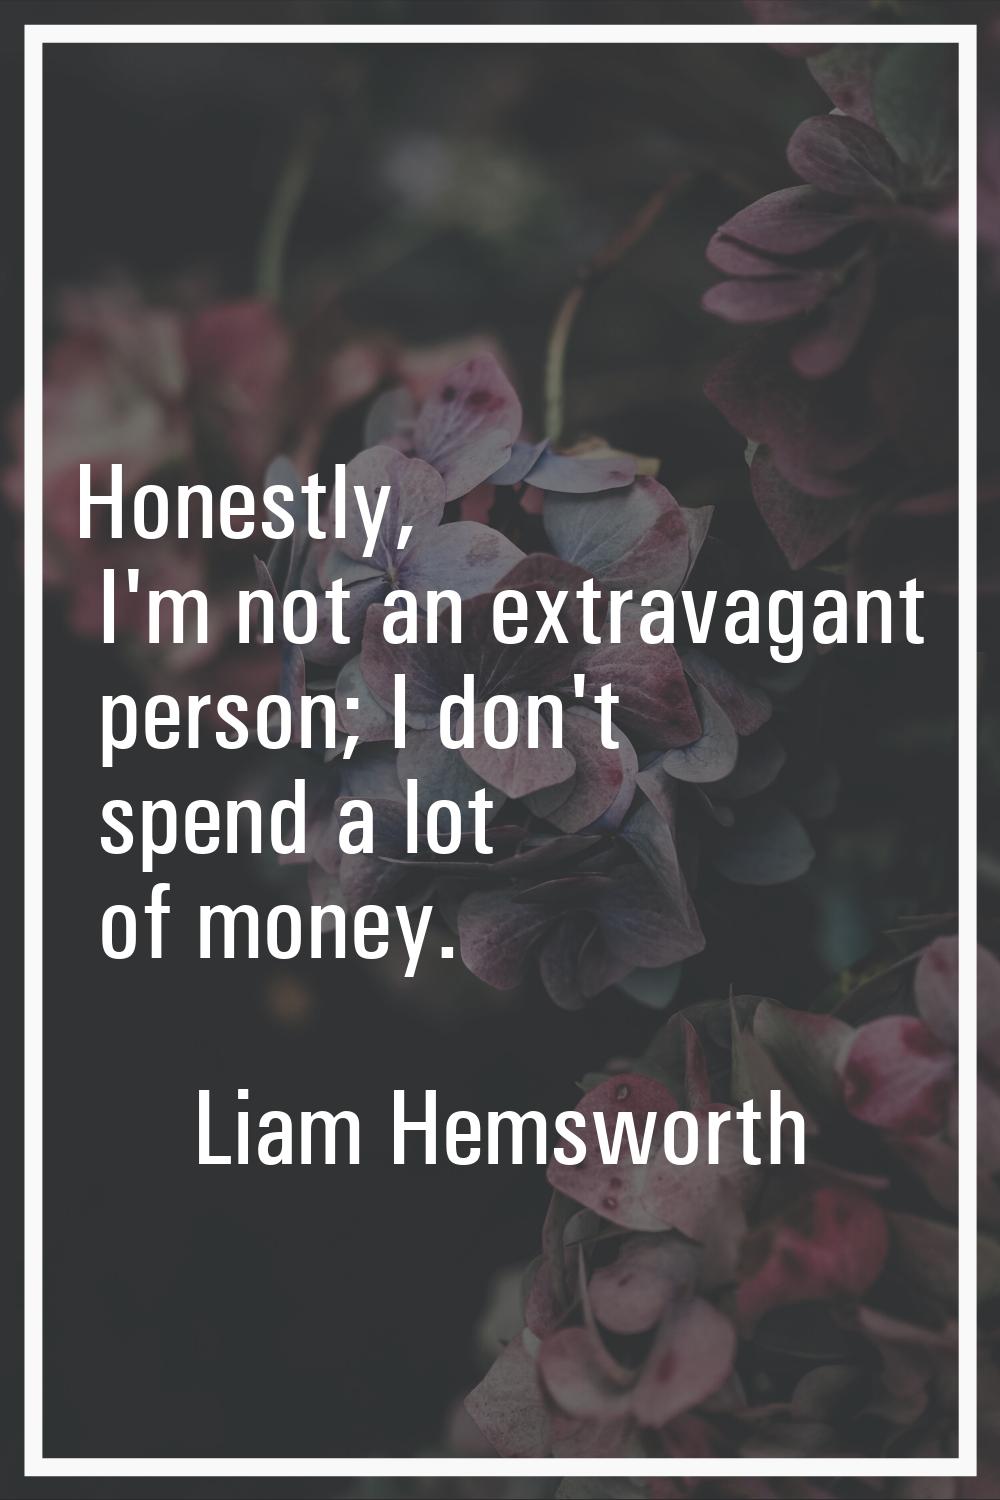 Honestly, I'm not an extravagant person; I don't spend a lot of money.